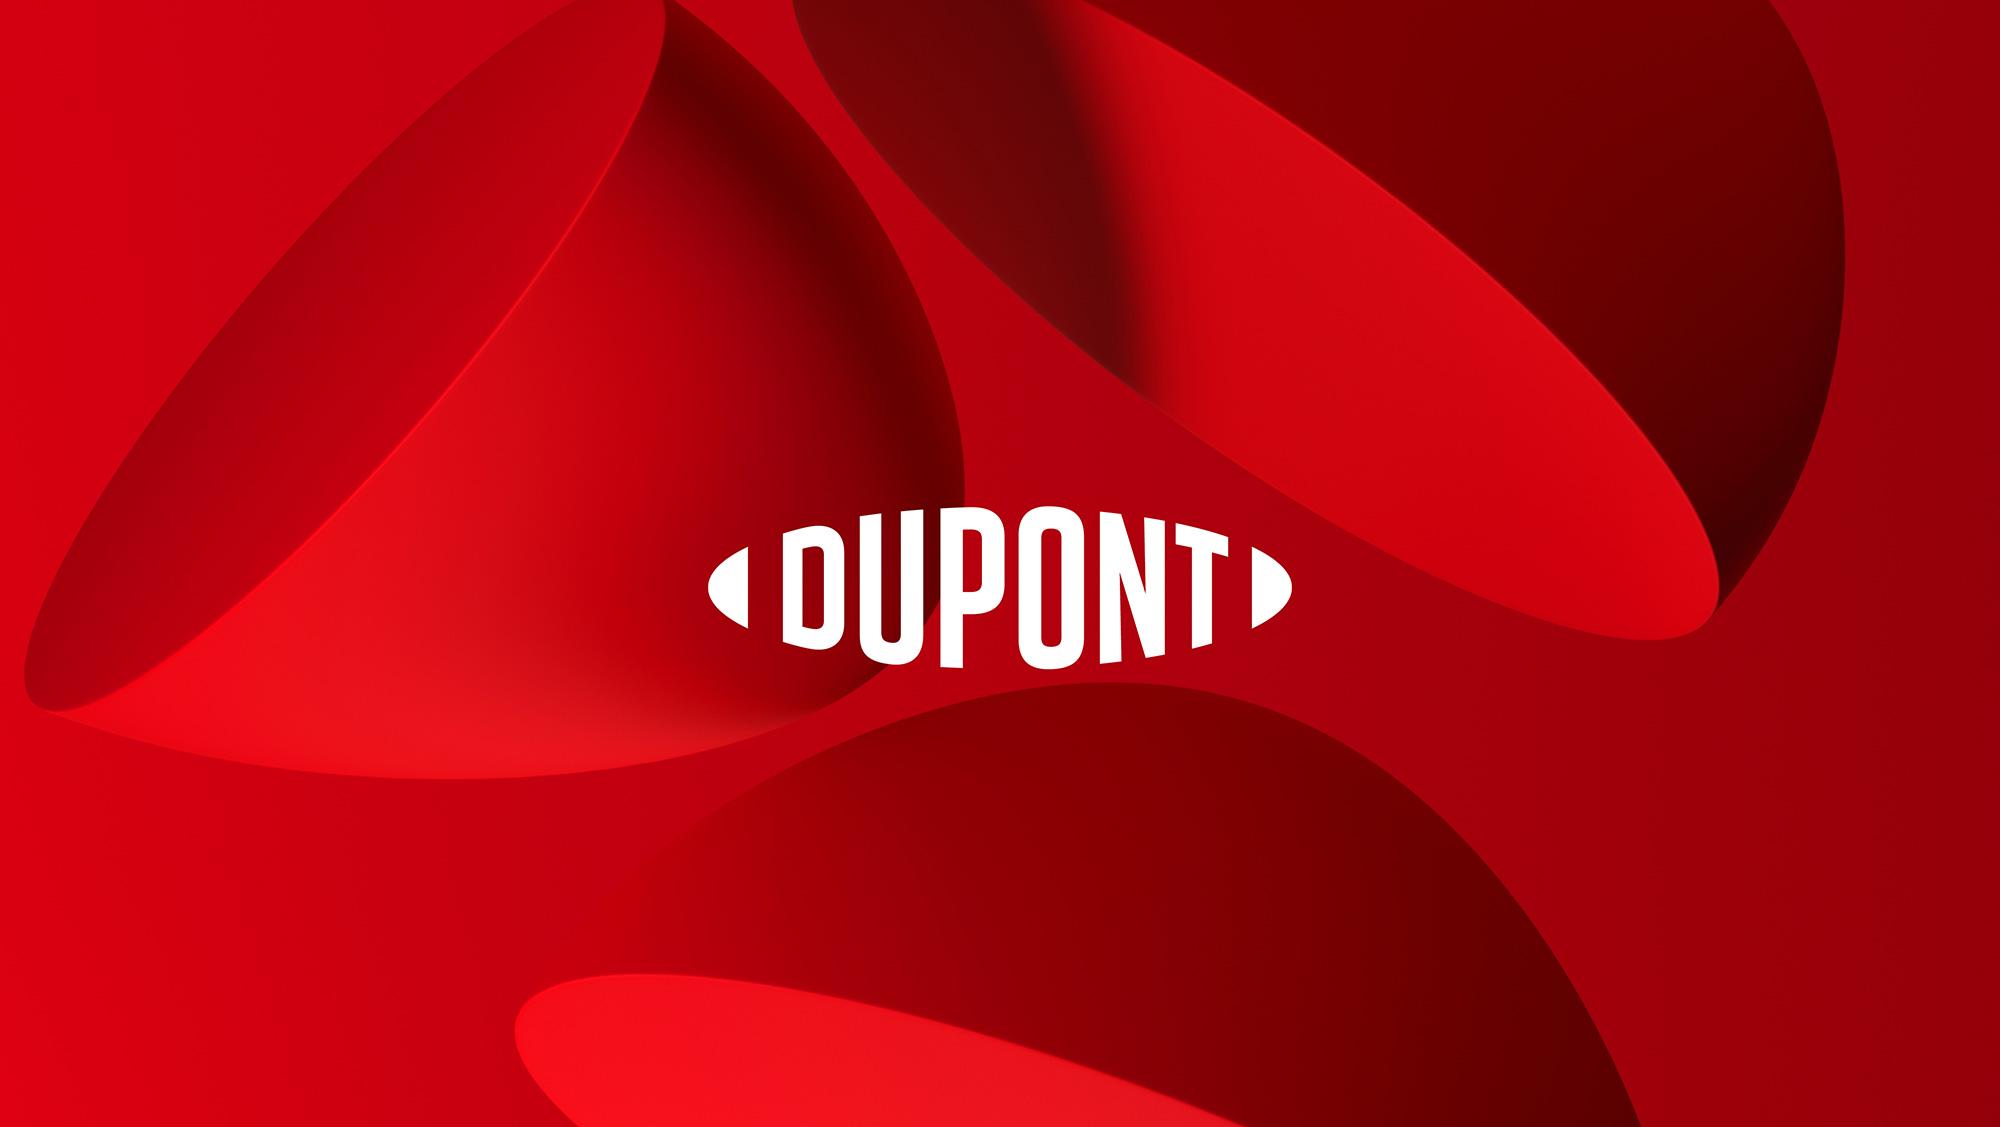 Dupont Logo - Brand New: New Logo and Identity for DuPont by Lippincott